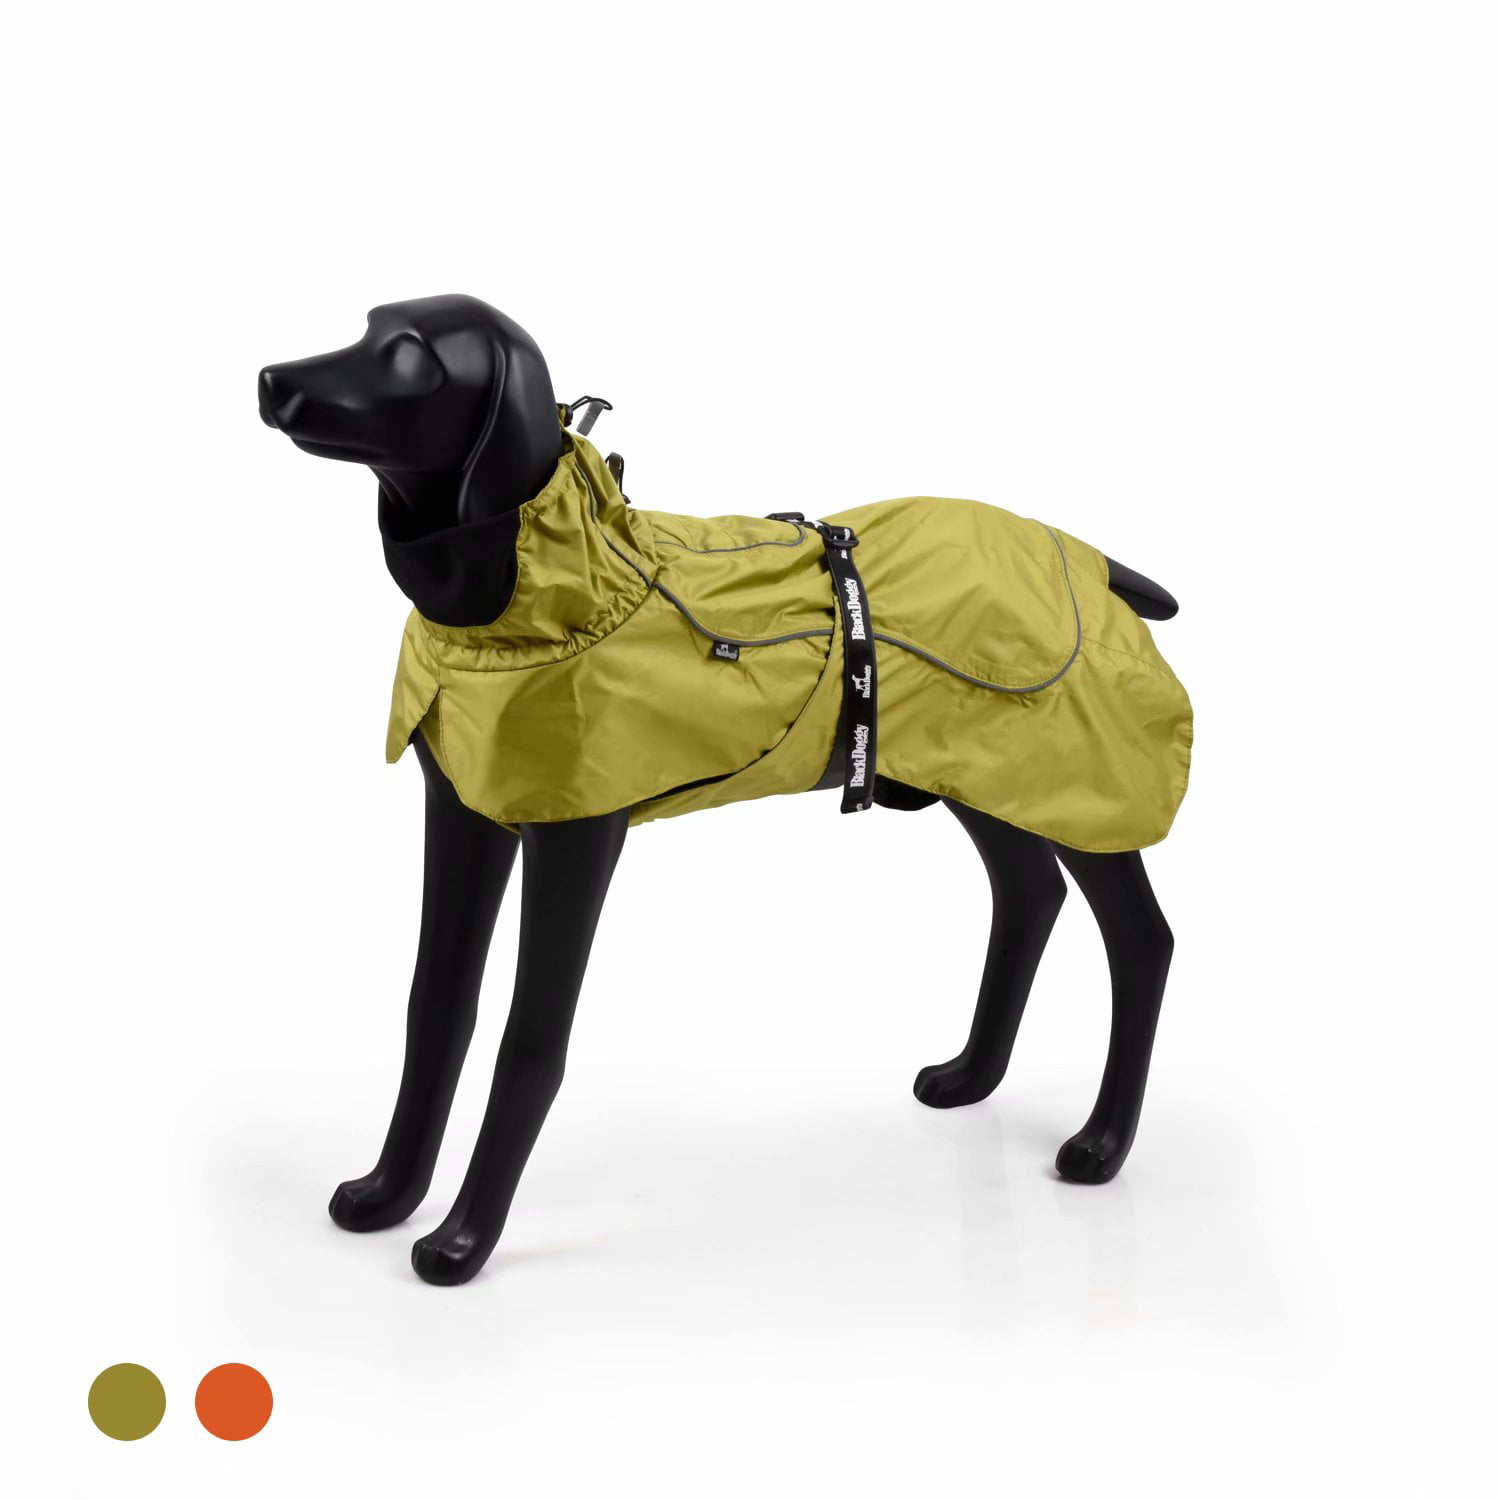 Warm Padded Polyester Windproof & Breathable Dog Coat/Jacket Fenside Country Clothing Waterproof 8in/20cm, Black